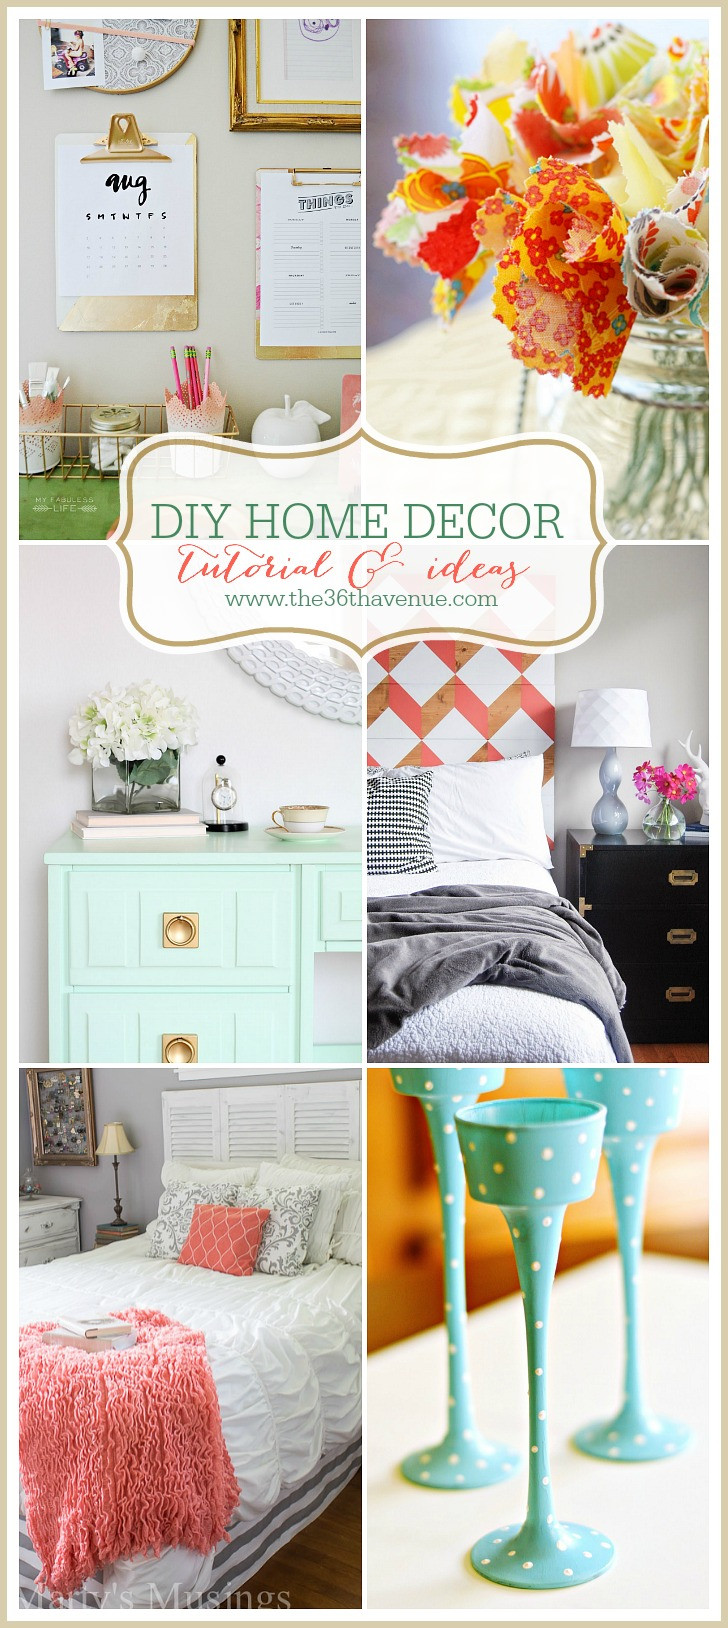 DIY Craft Ideas For Home Decor
 The 36th AVENUE Home Decor DIY Projects